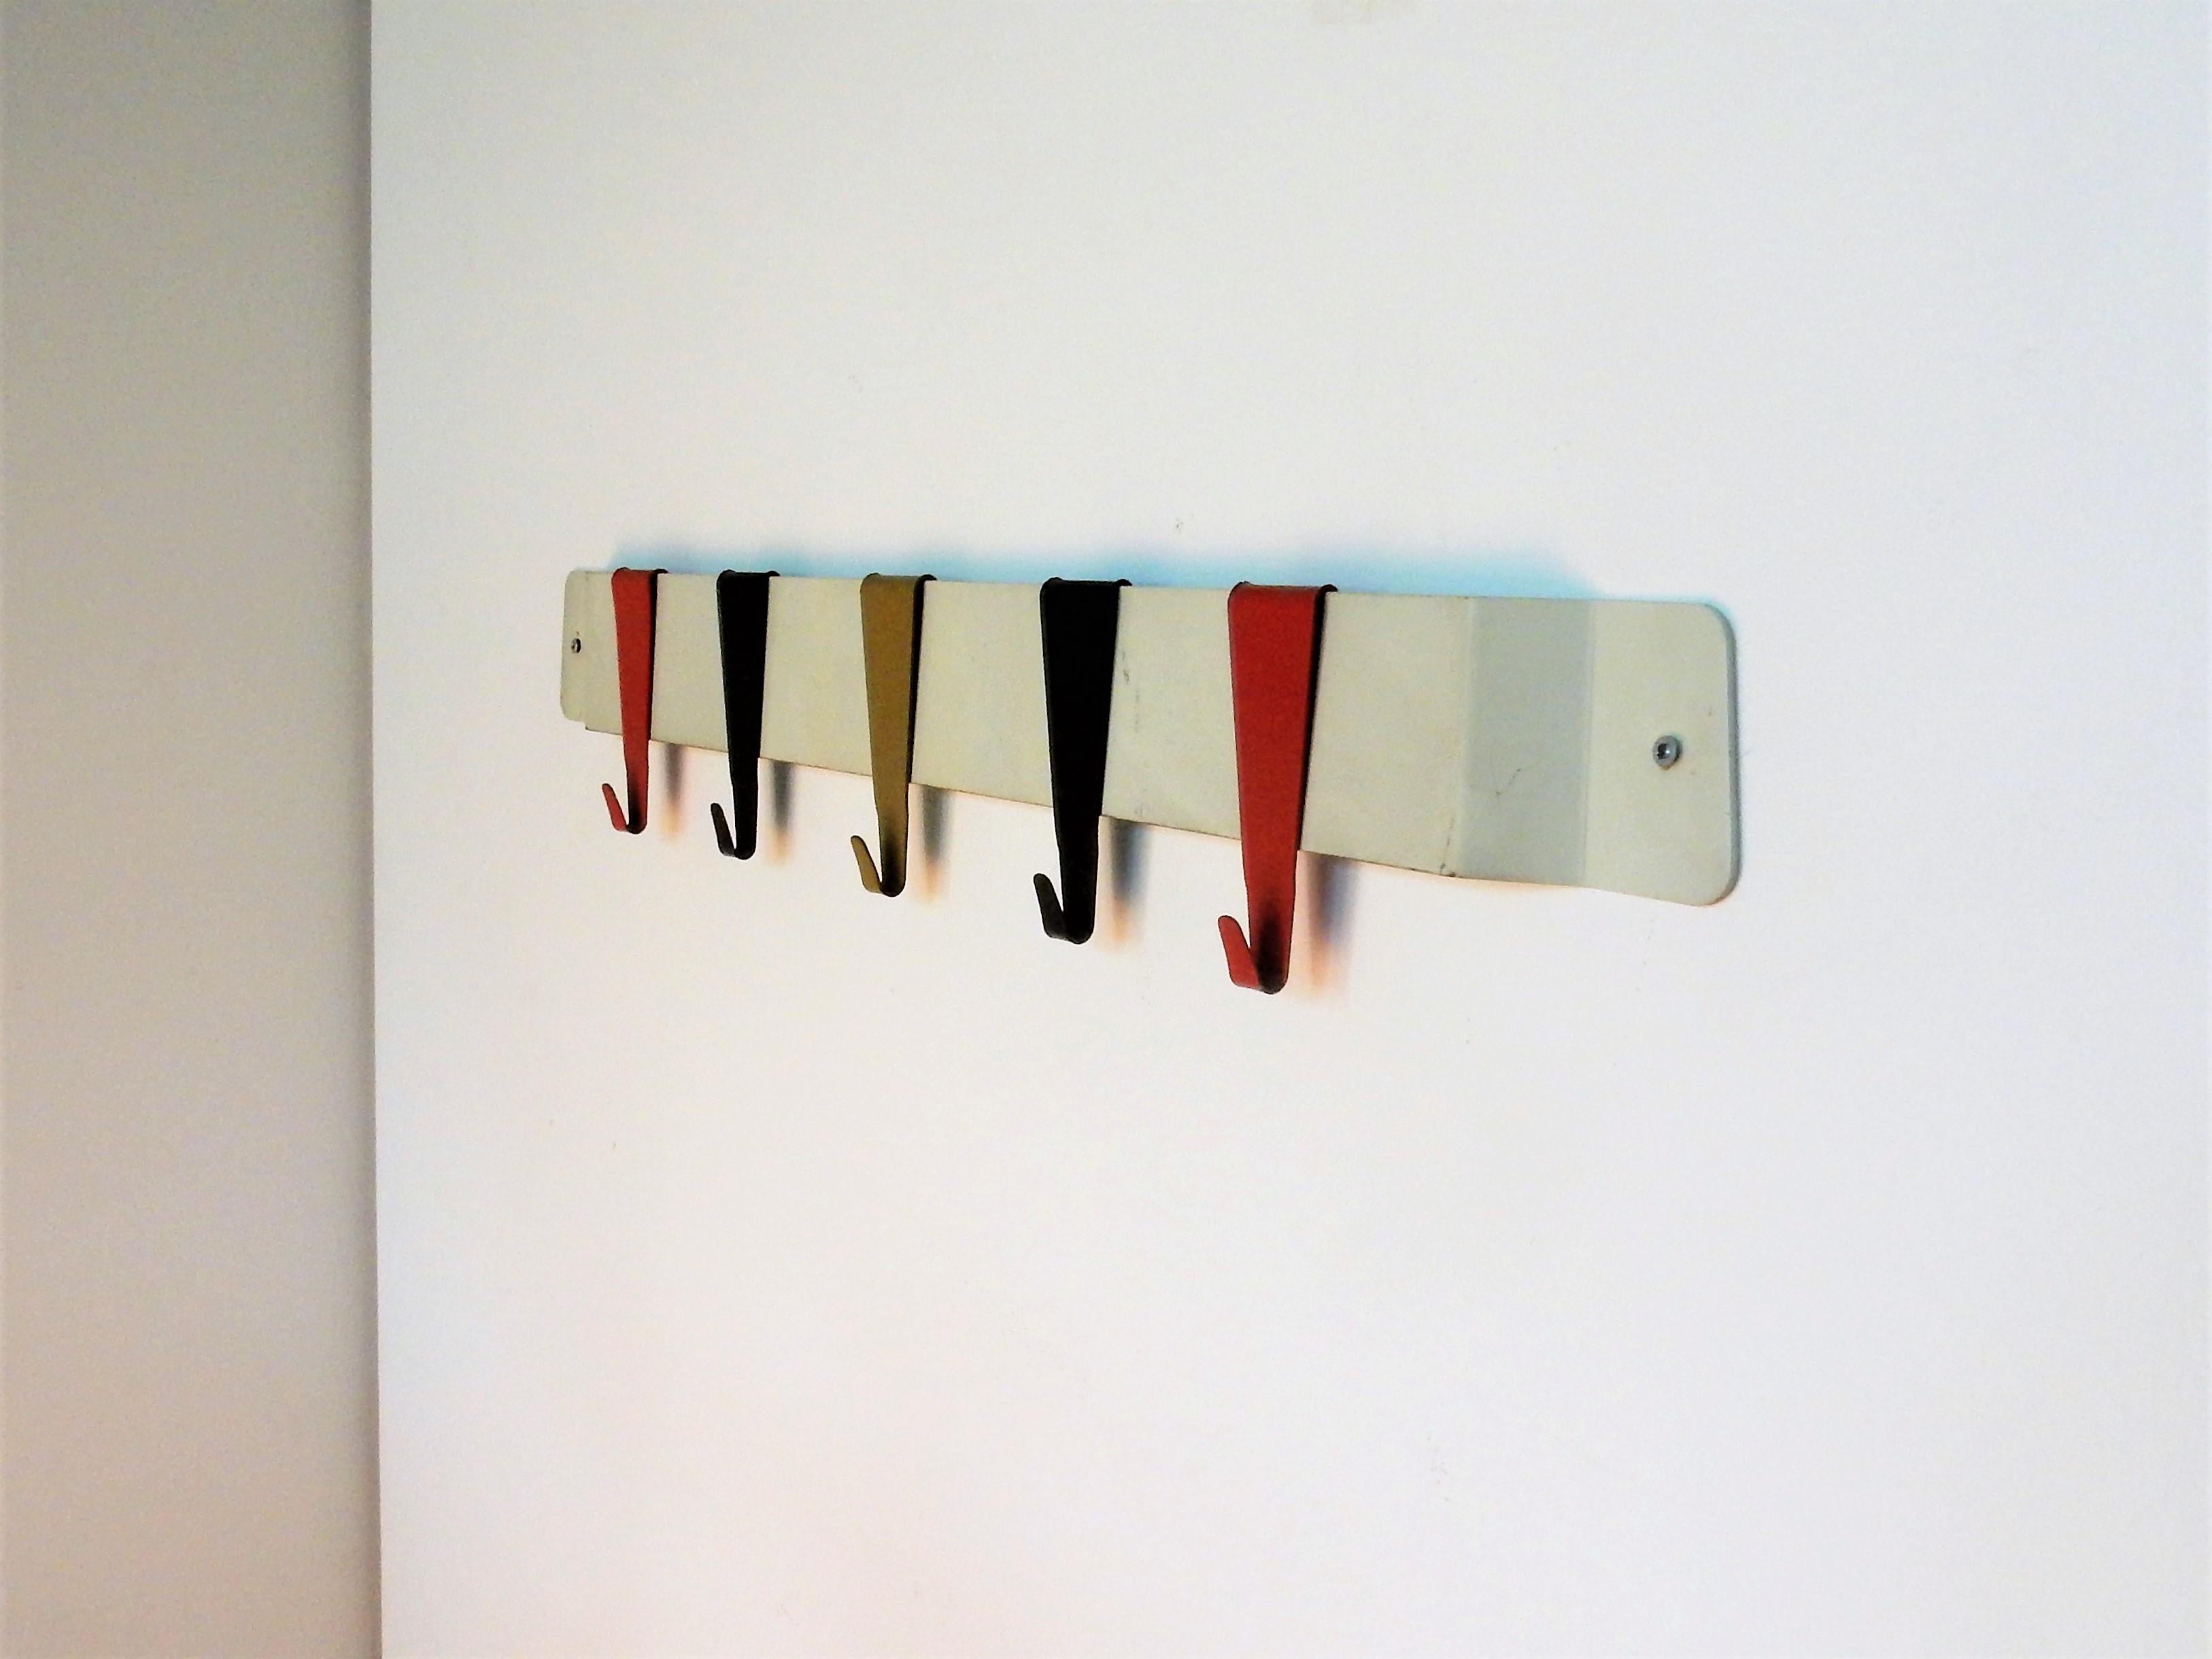 This small and elegant coat rack was mostly used as a children’s coat rack. It is a rack not often seen. It has a Minimalist white metal frame and five multicolored metal hooks. It is in a very good condition with some signs of age and use.